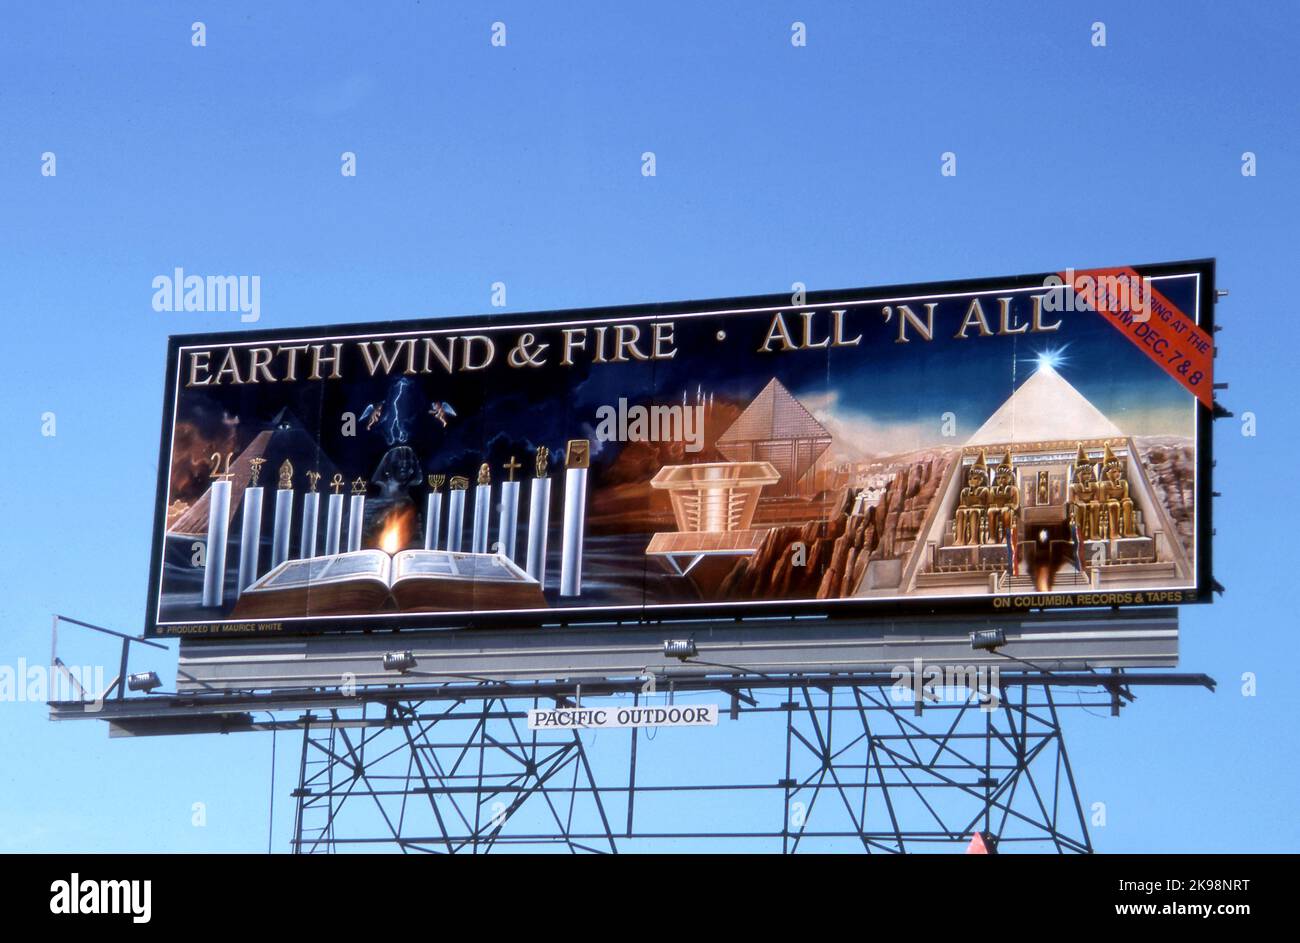 Earth Wind and Fire billboard for the album All N All on the Sunset Strip in Los Angeles, CA, USA, 1977 Stock Photo